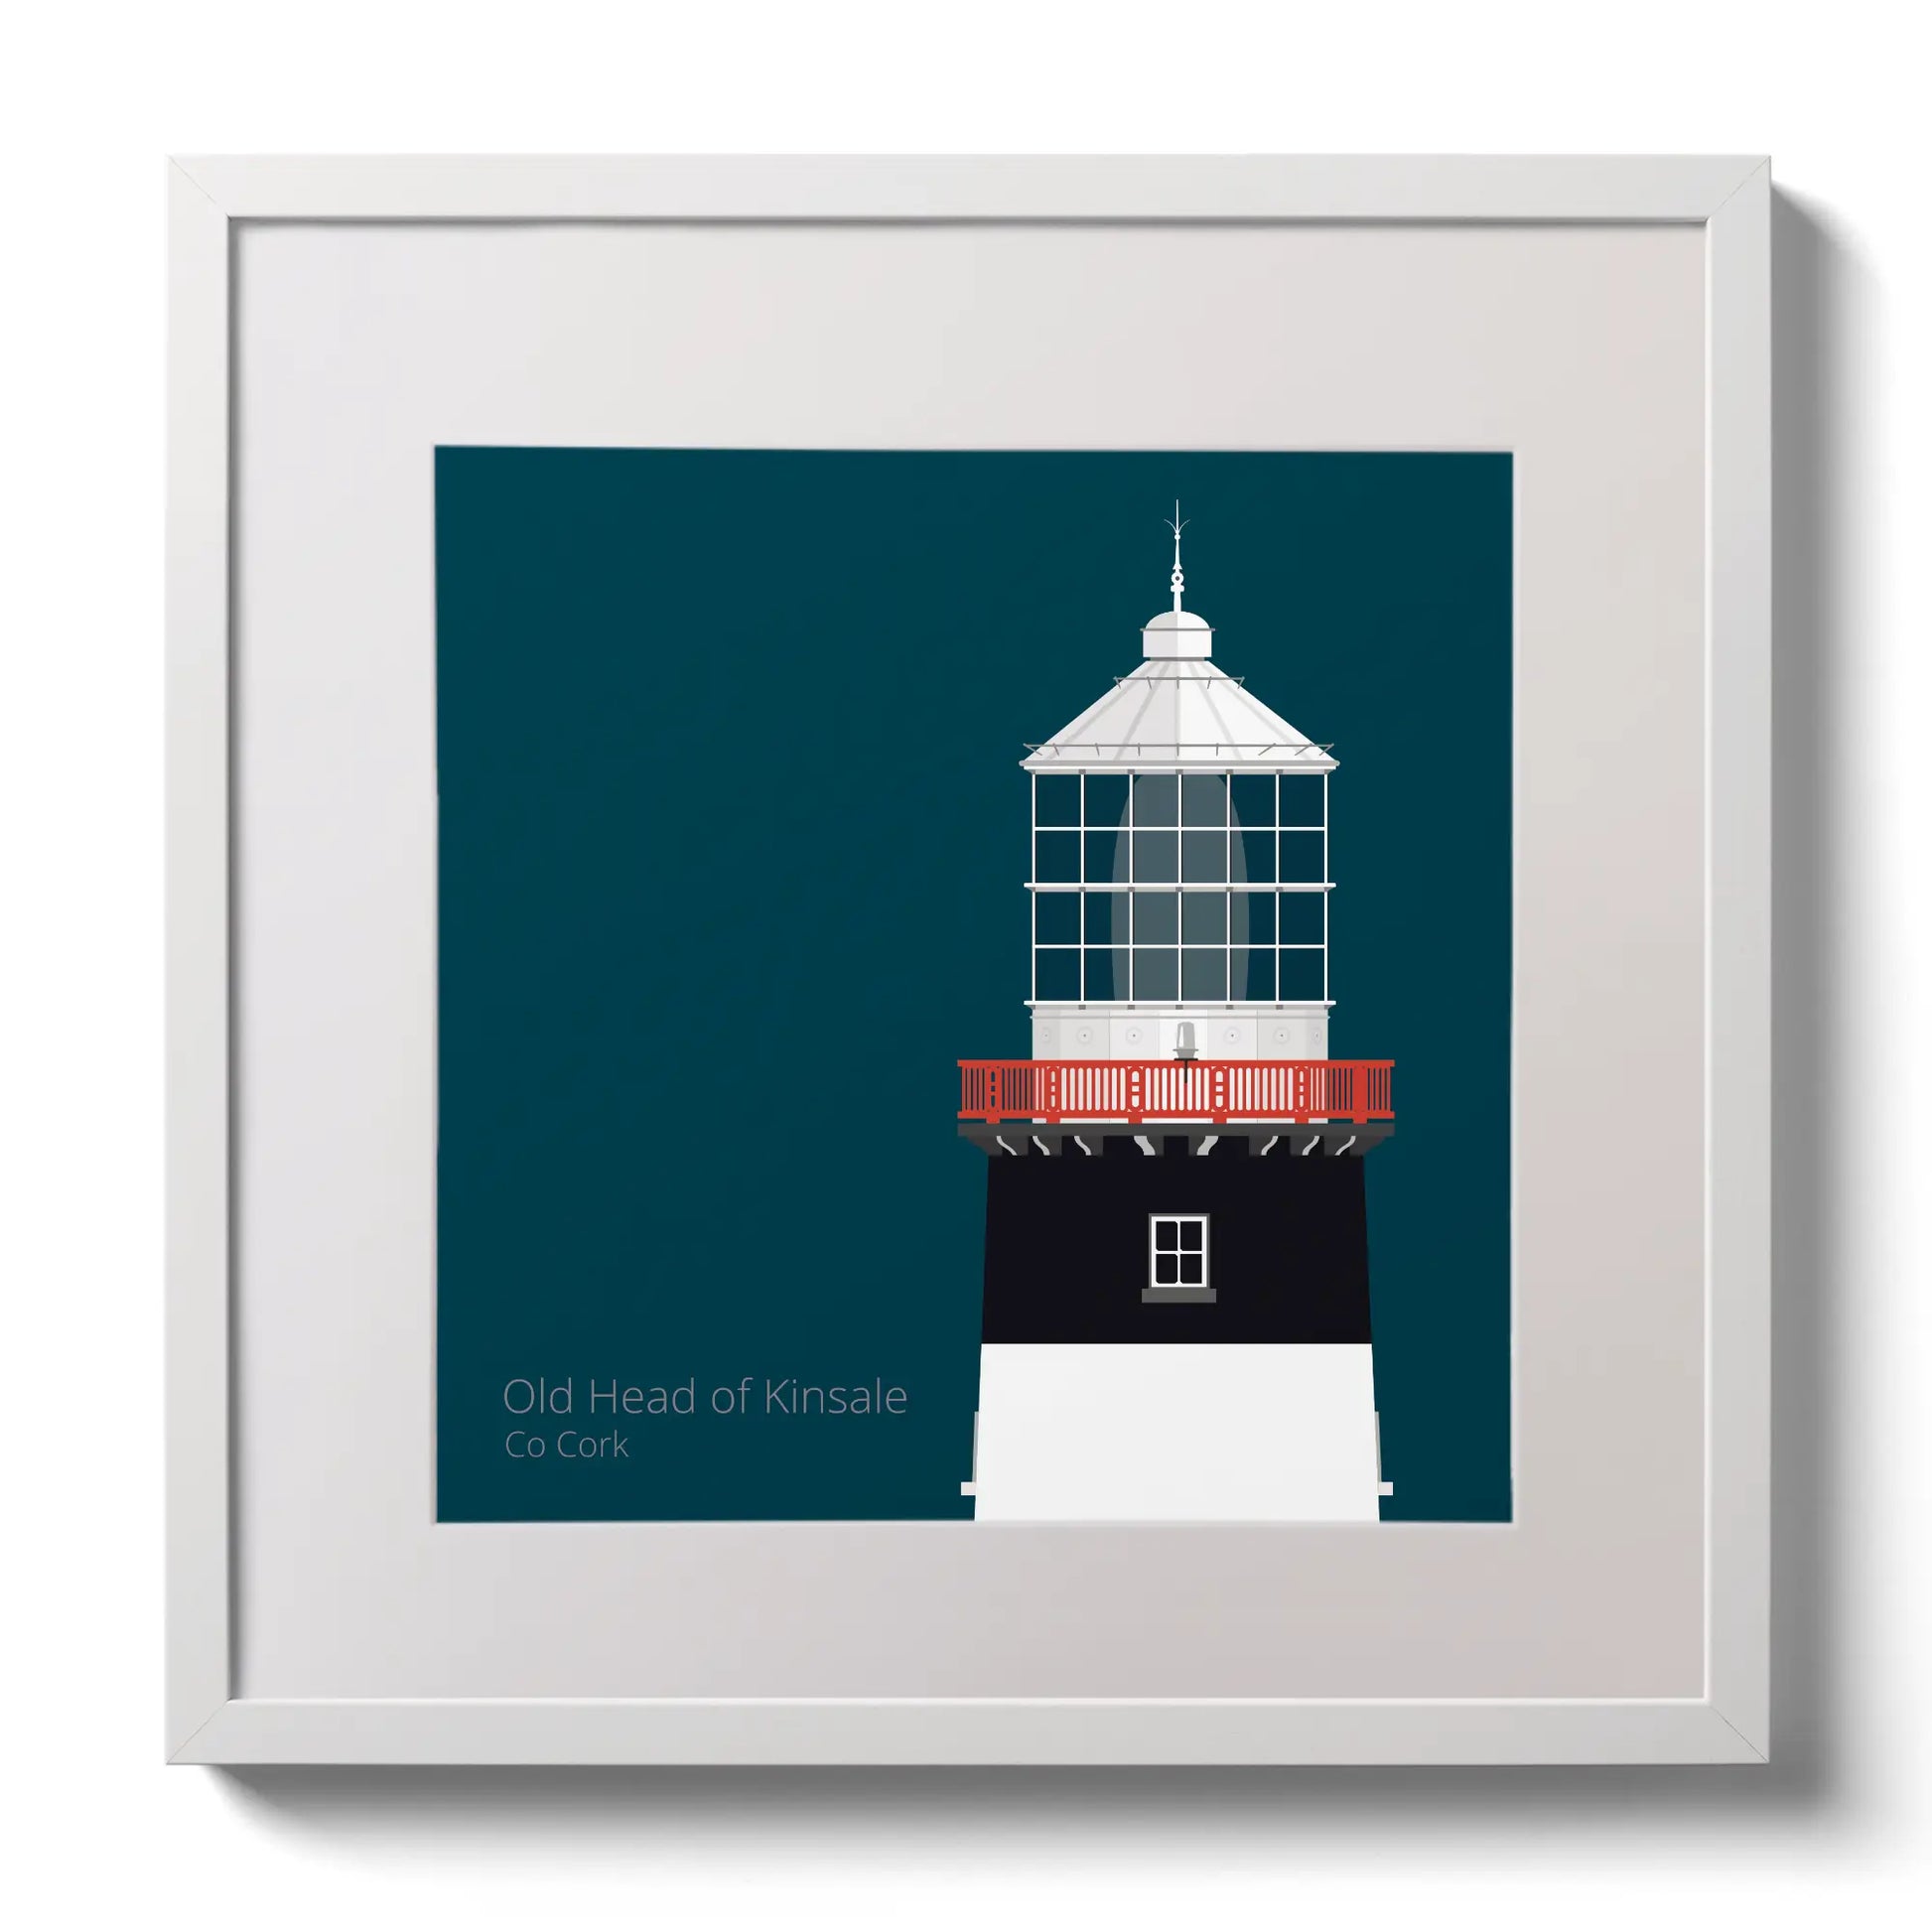 Illustration of Old Head of Kinsale lighthouse on a midnight blue background,  in a white square frame measuring 30x30cm.